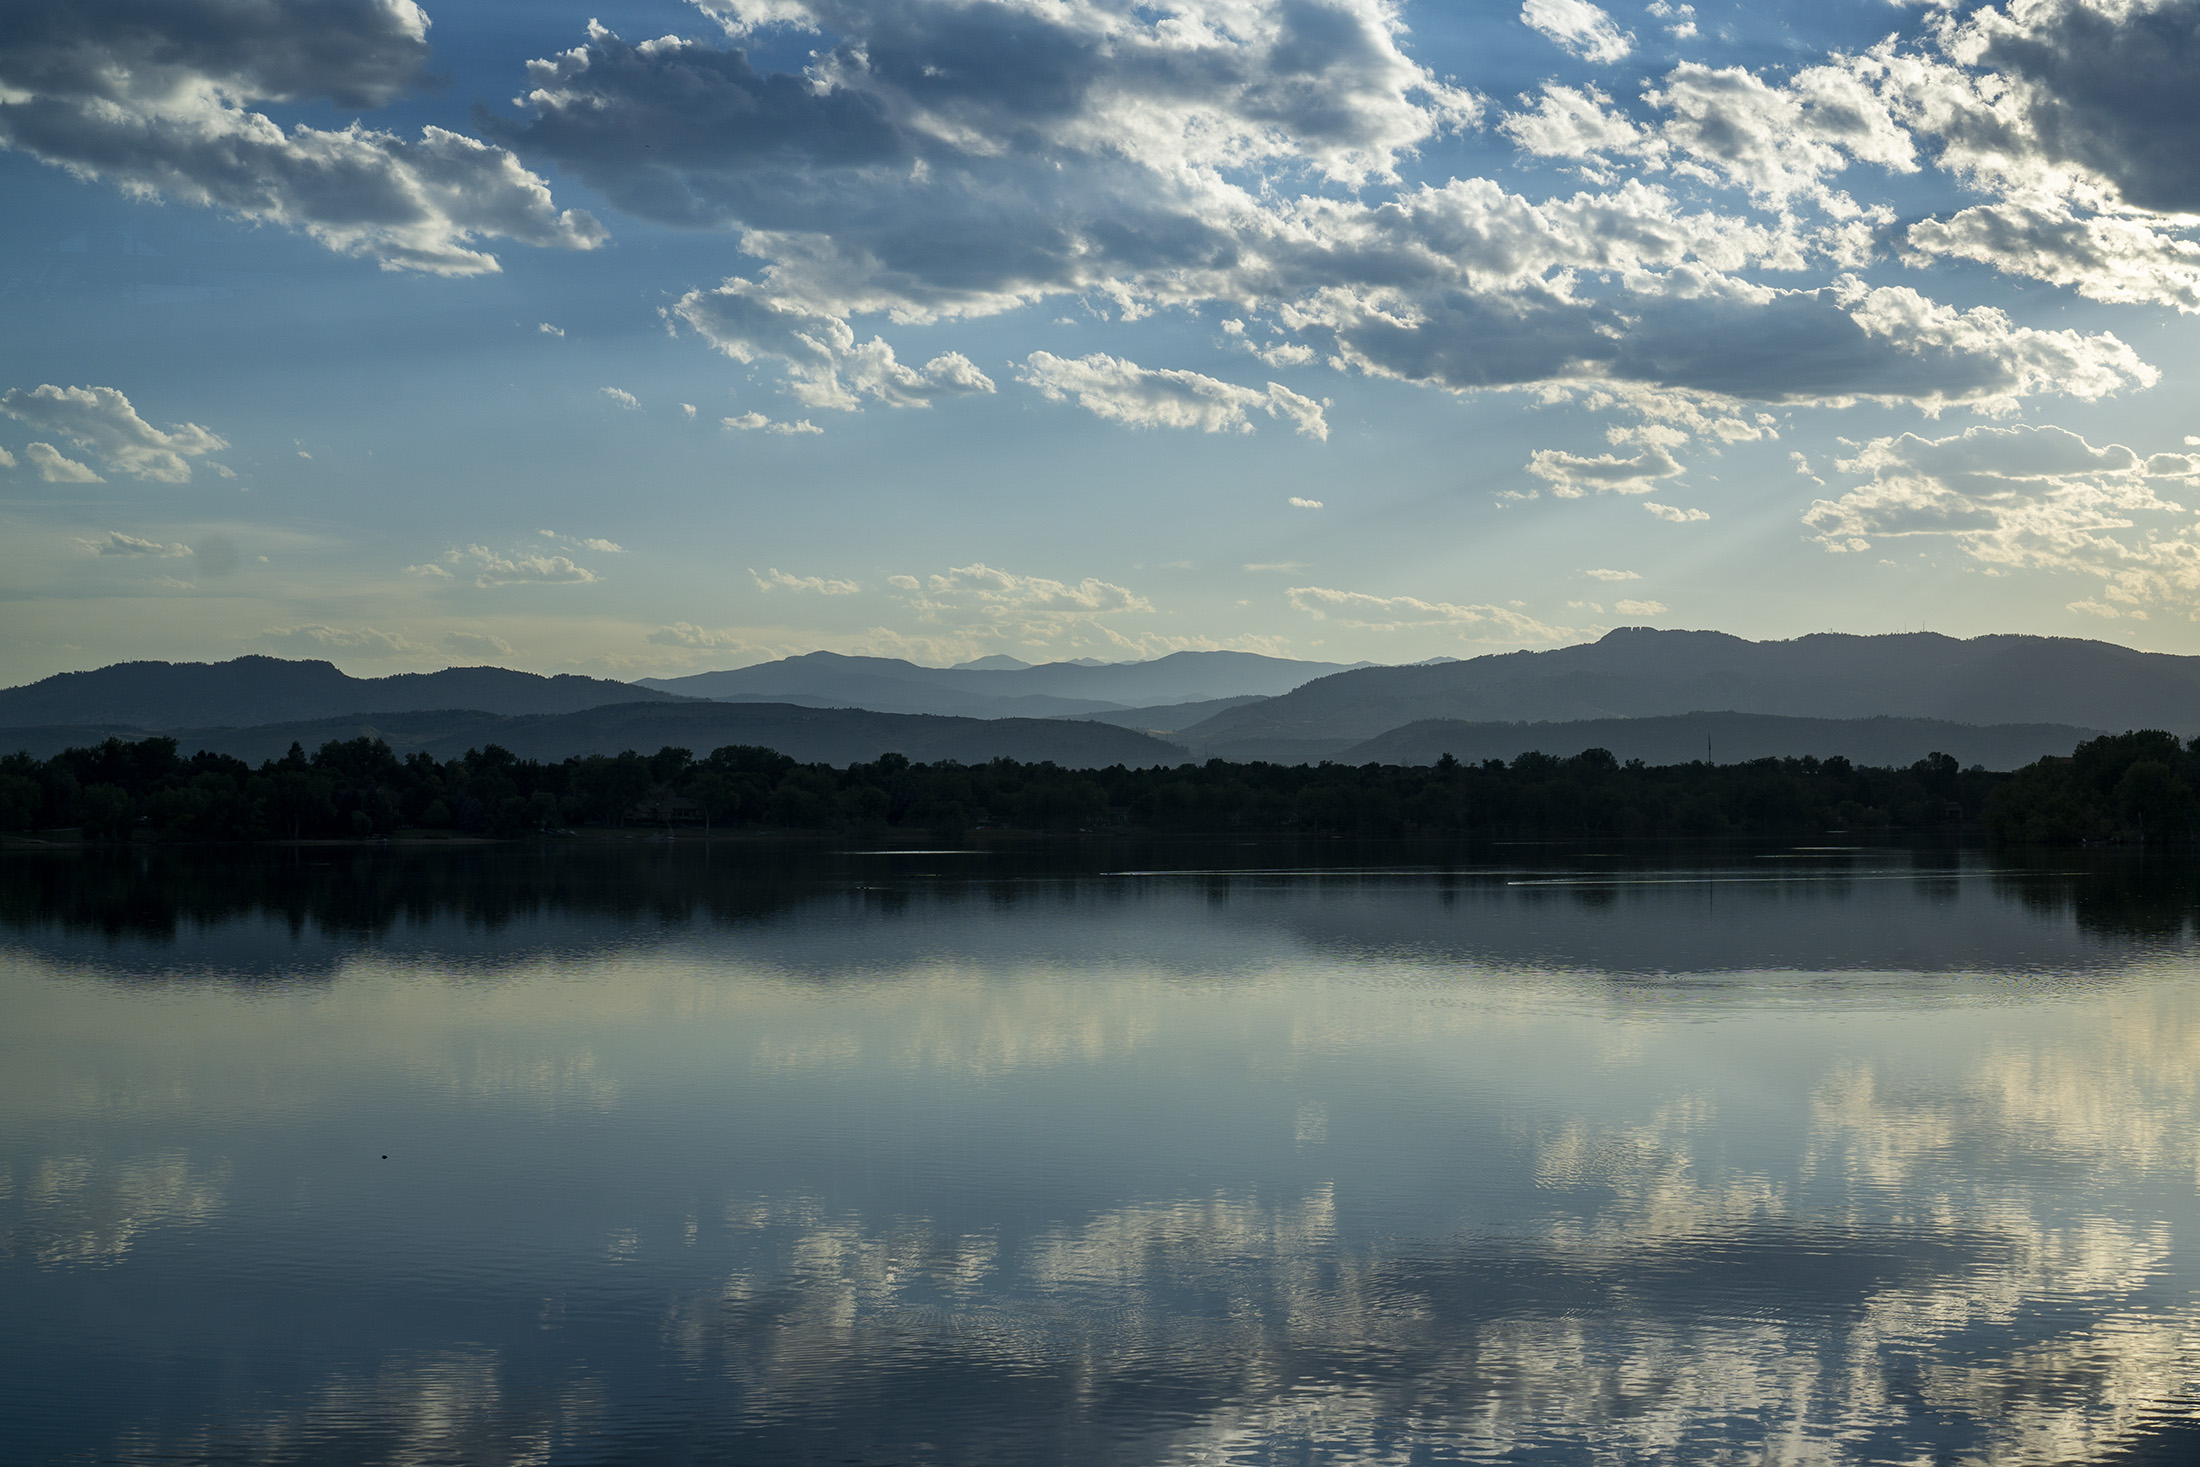 View toward Horsetooth Rock across a lake in early evening, Fort Collins, Colorado / Darker than Green